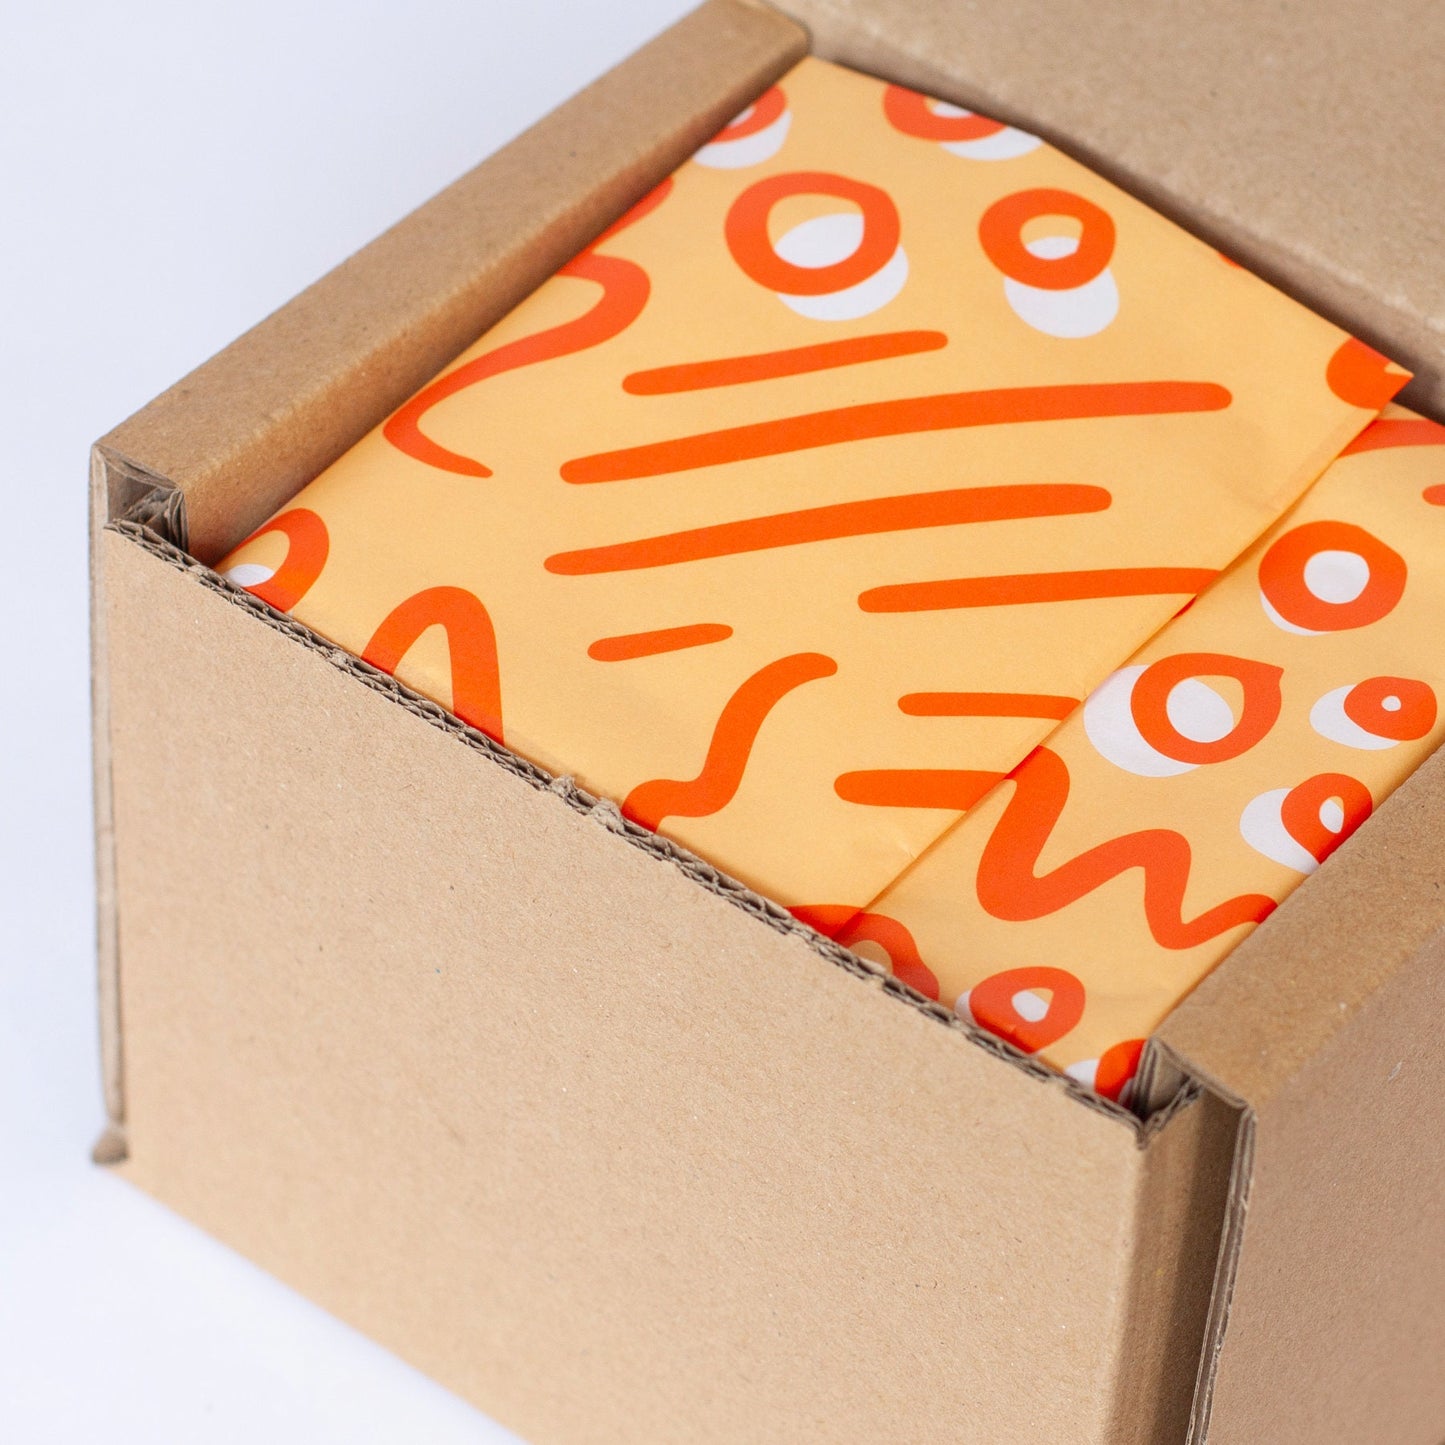 Tissue Paper Orange doodle, 500mm x 380mm Recyclable, Compostable, Biodegradable